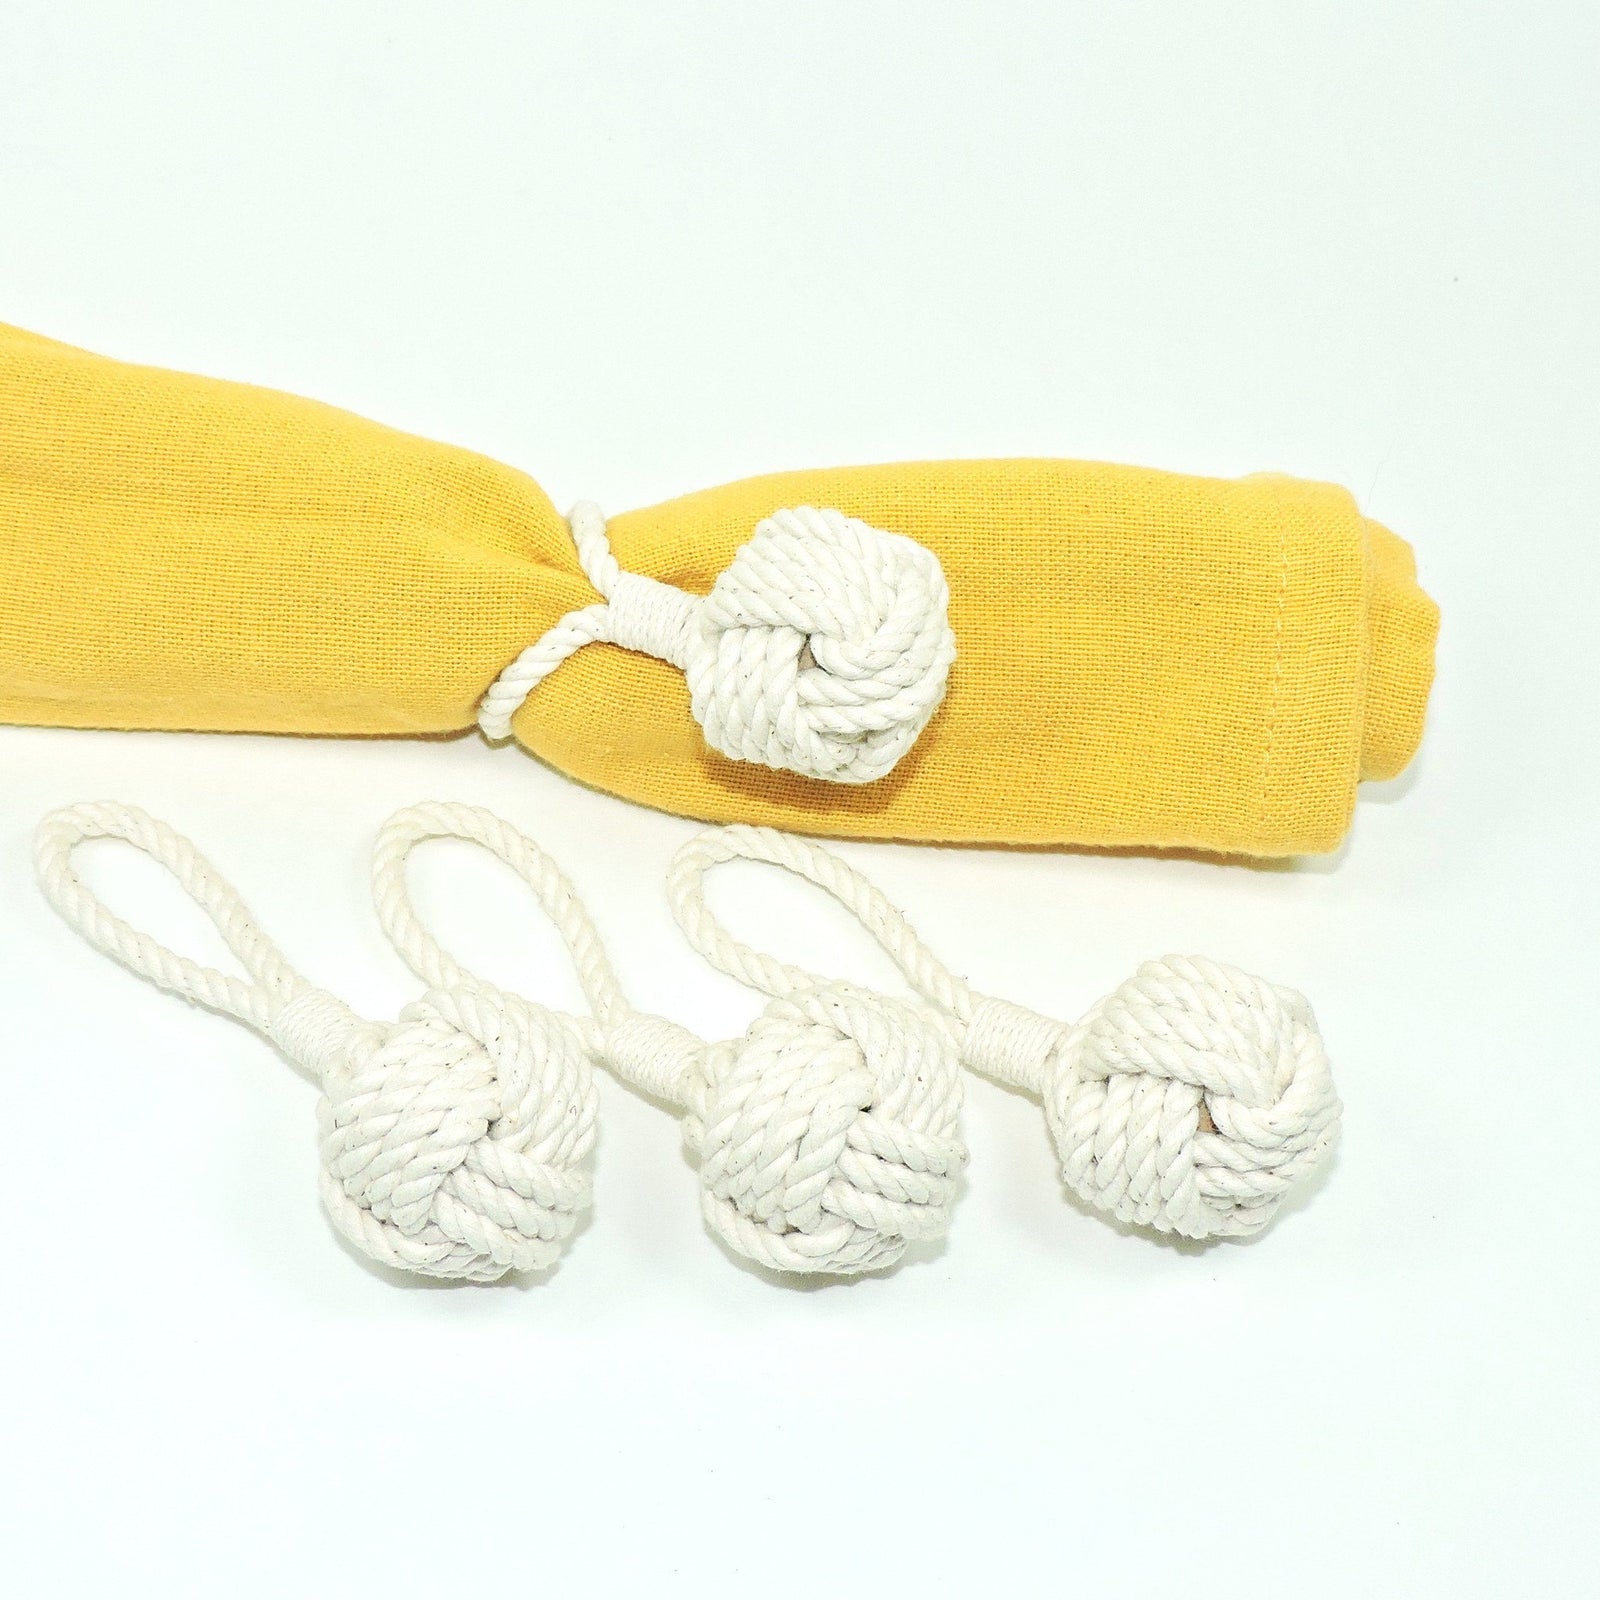 Nautical Knot Monkey Fist Knot Napkin Rings, Set of Four handmade at Mystic Knotwork